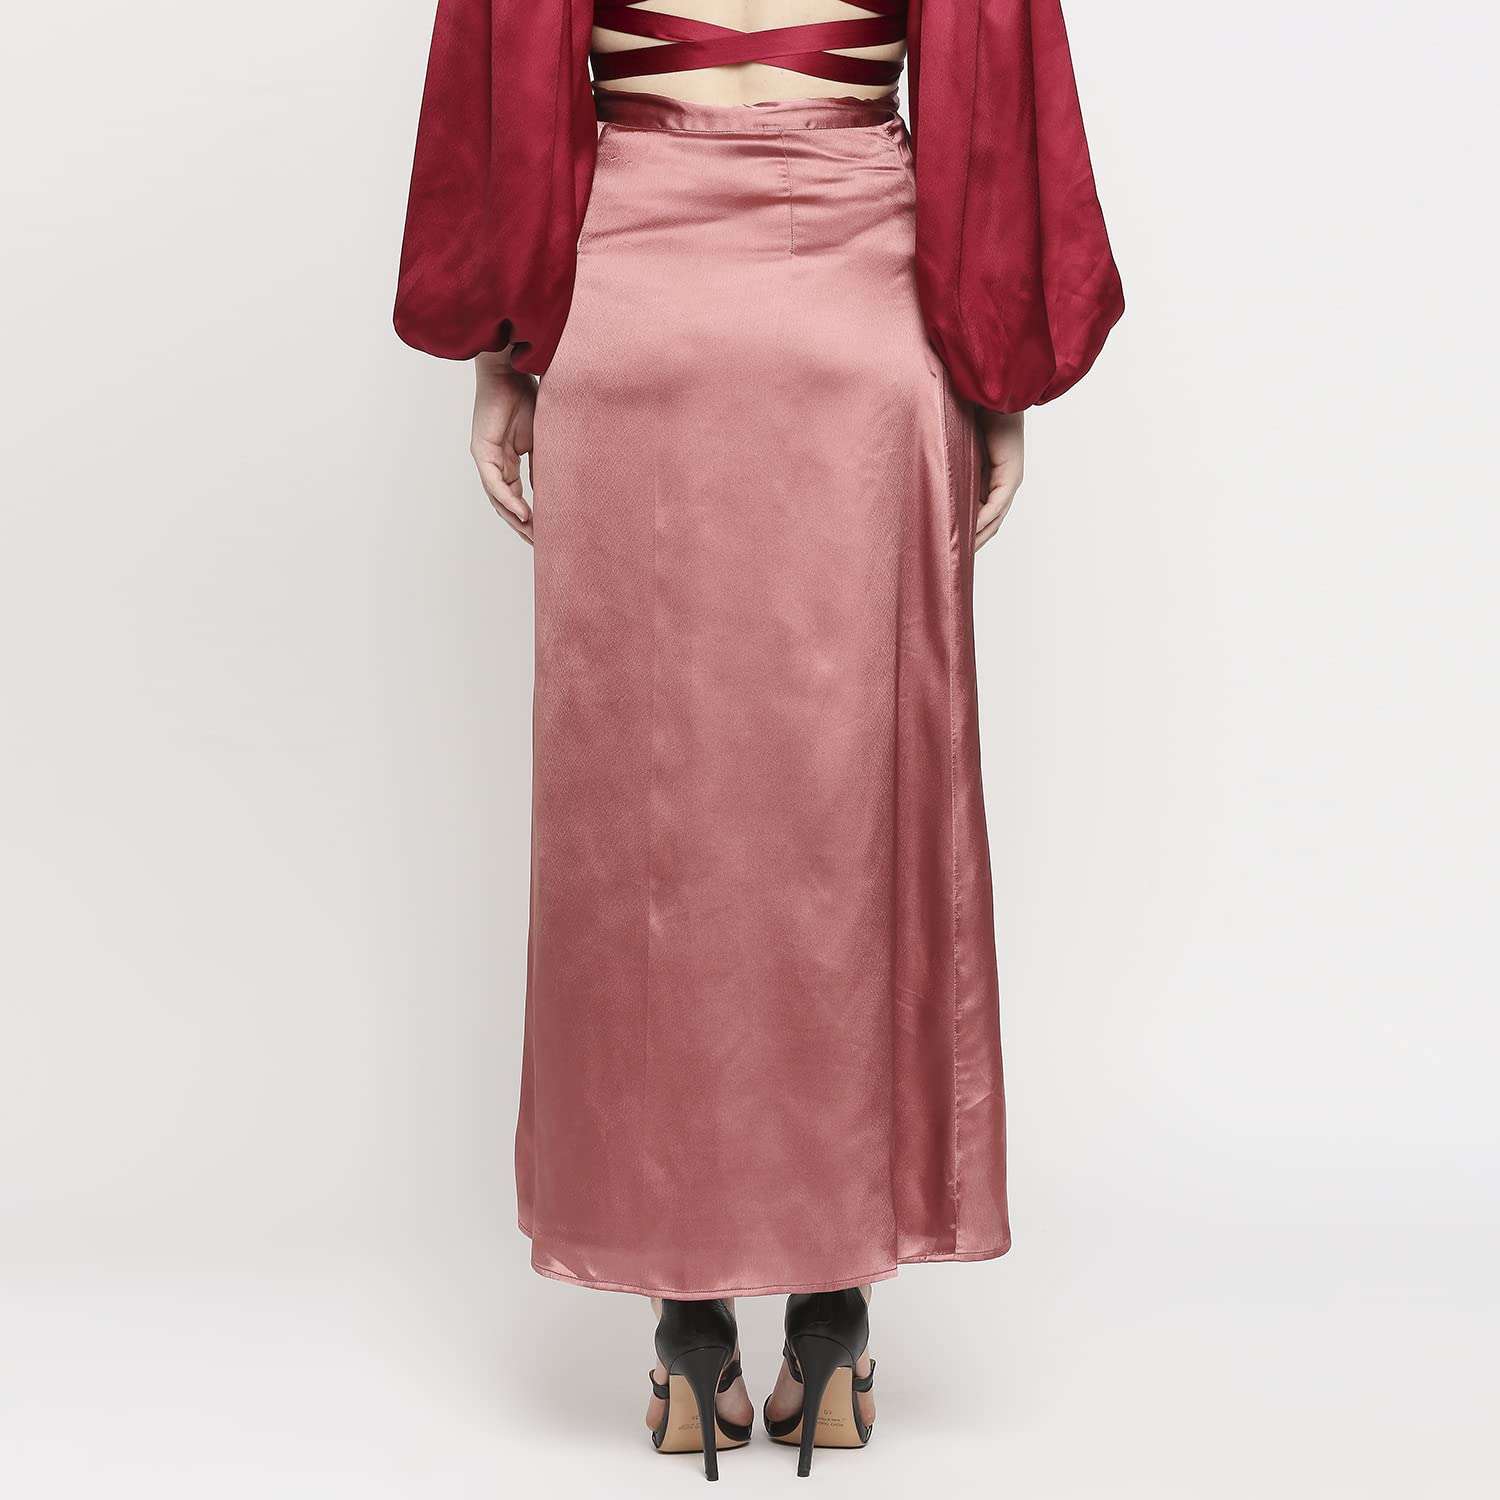 Rustic Pink Solid Satin Long Skirt-Wrap Knot